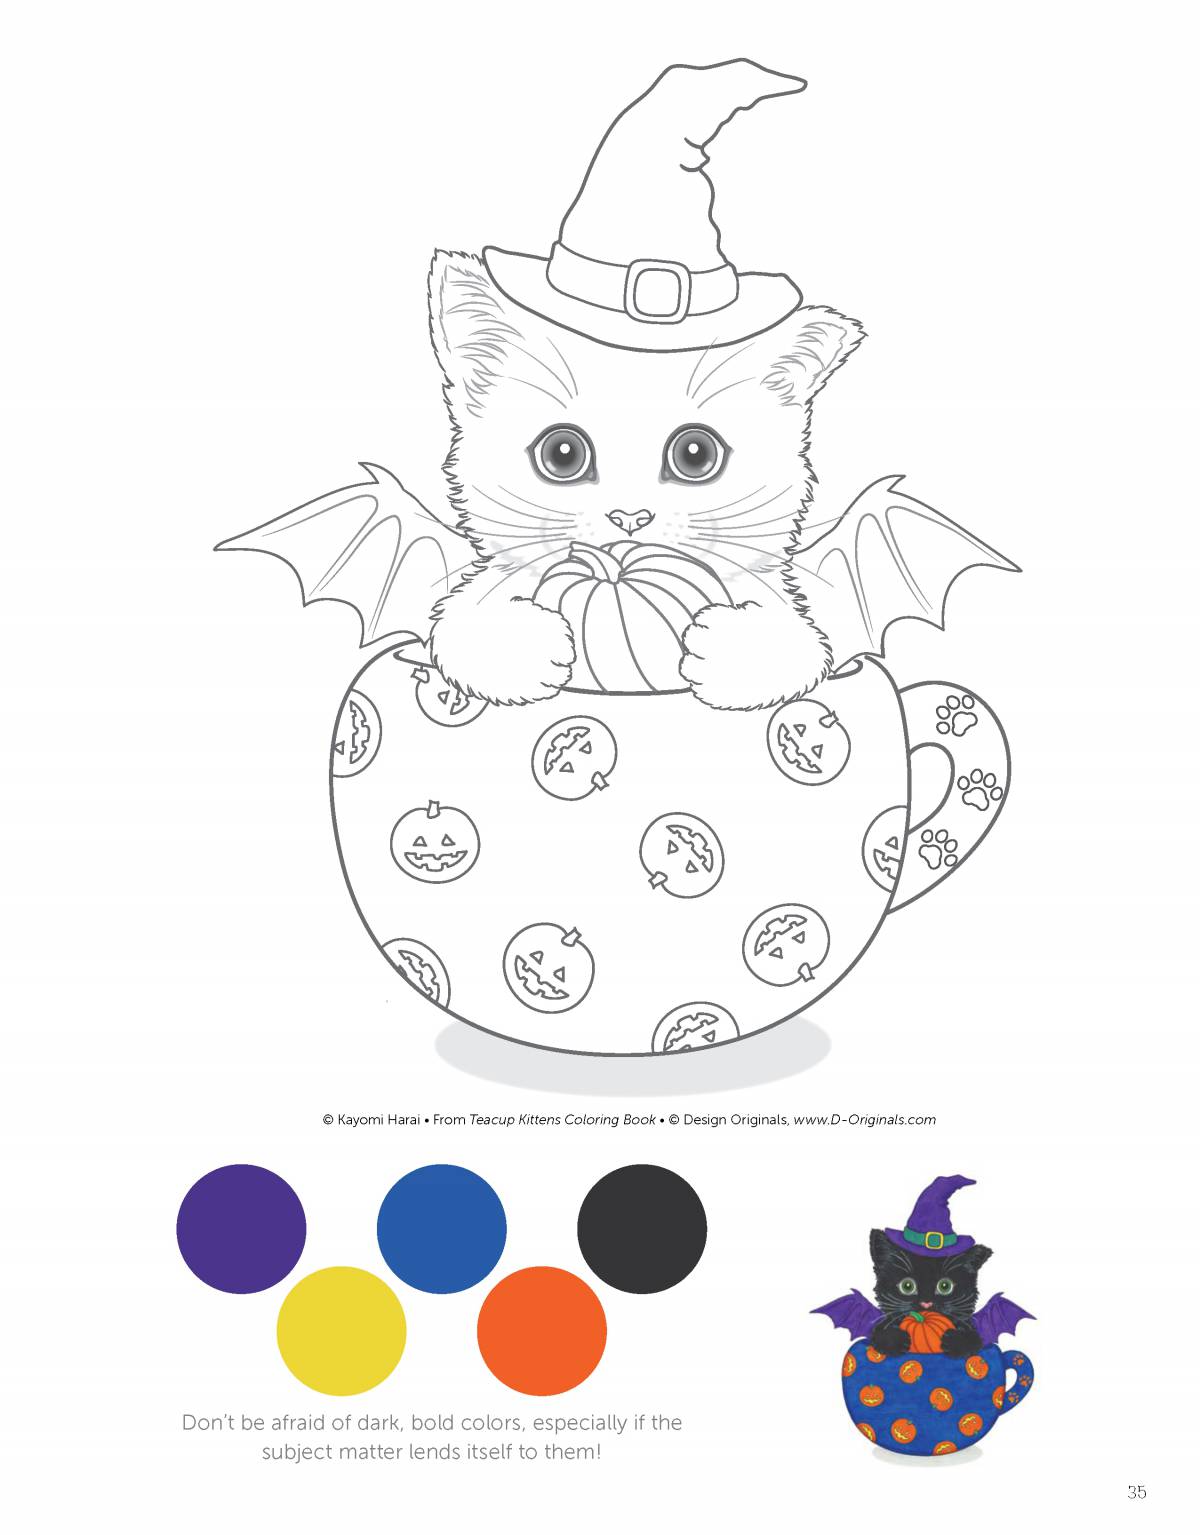 Coloring book funny kitten in a mug